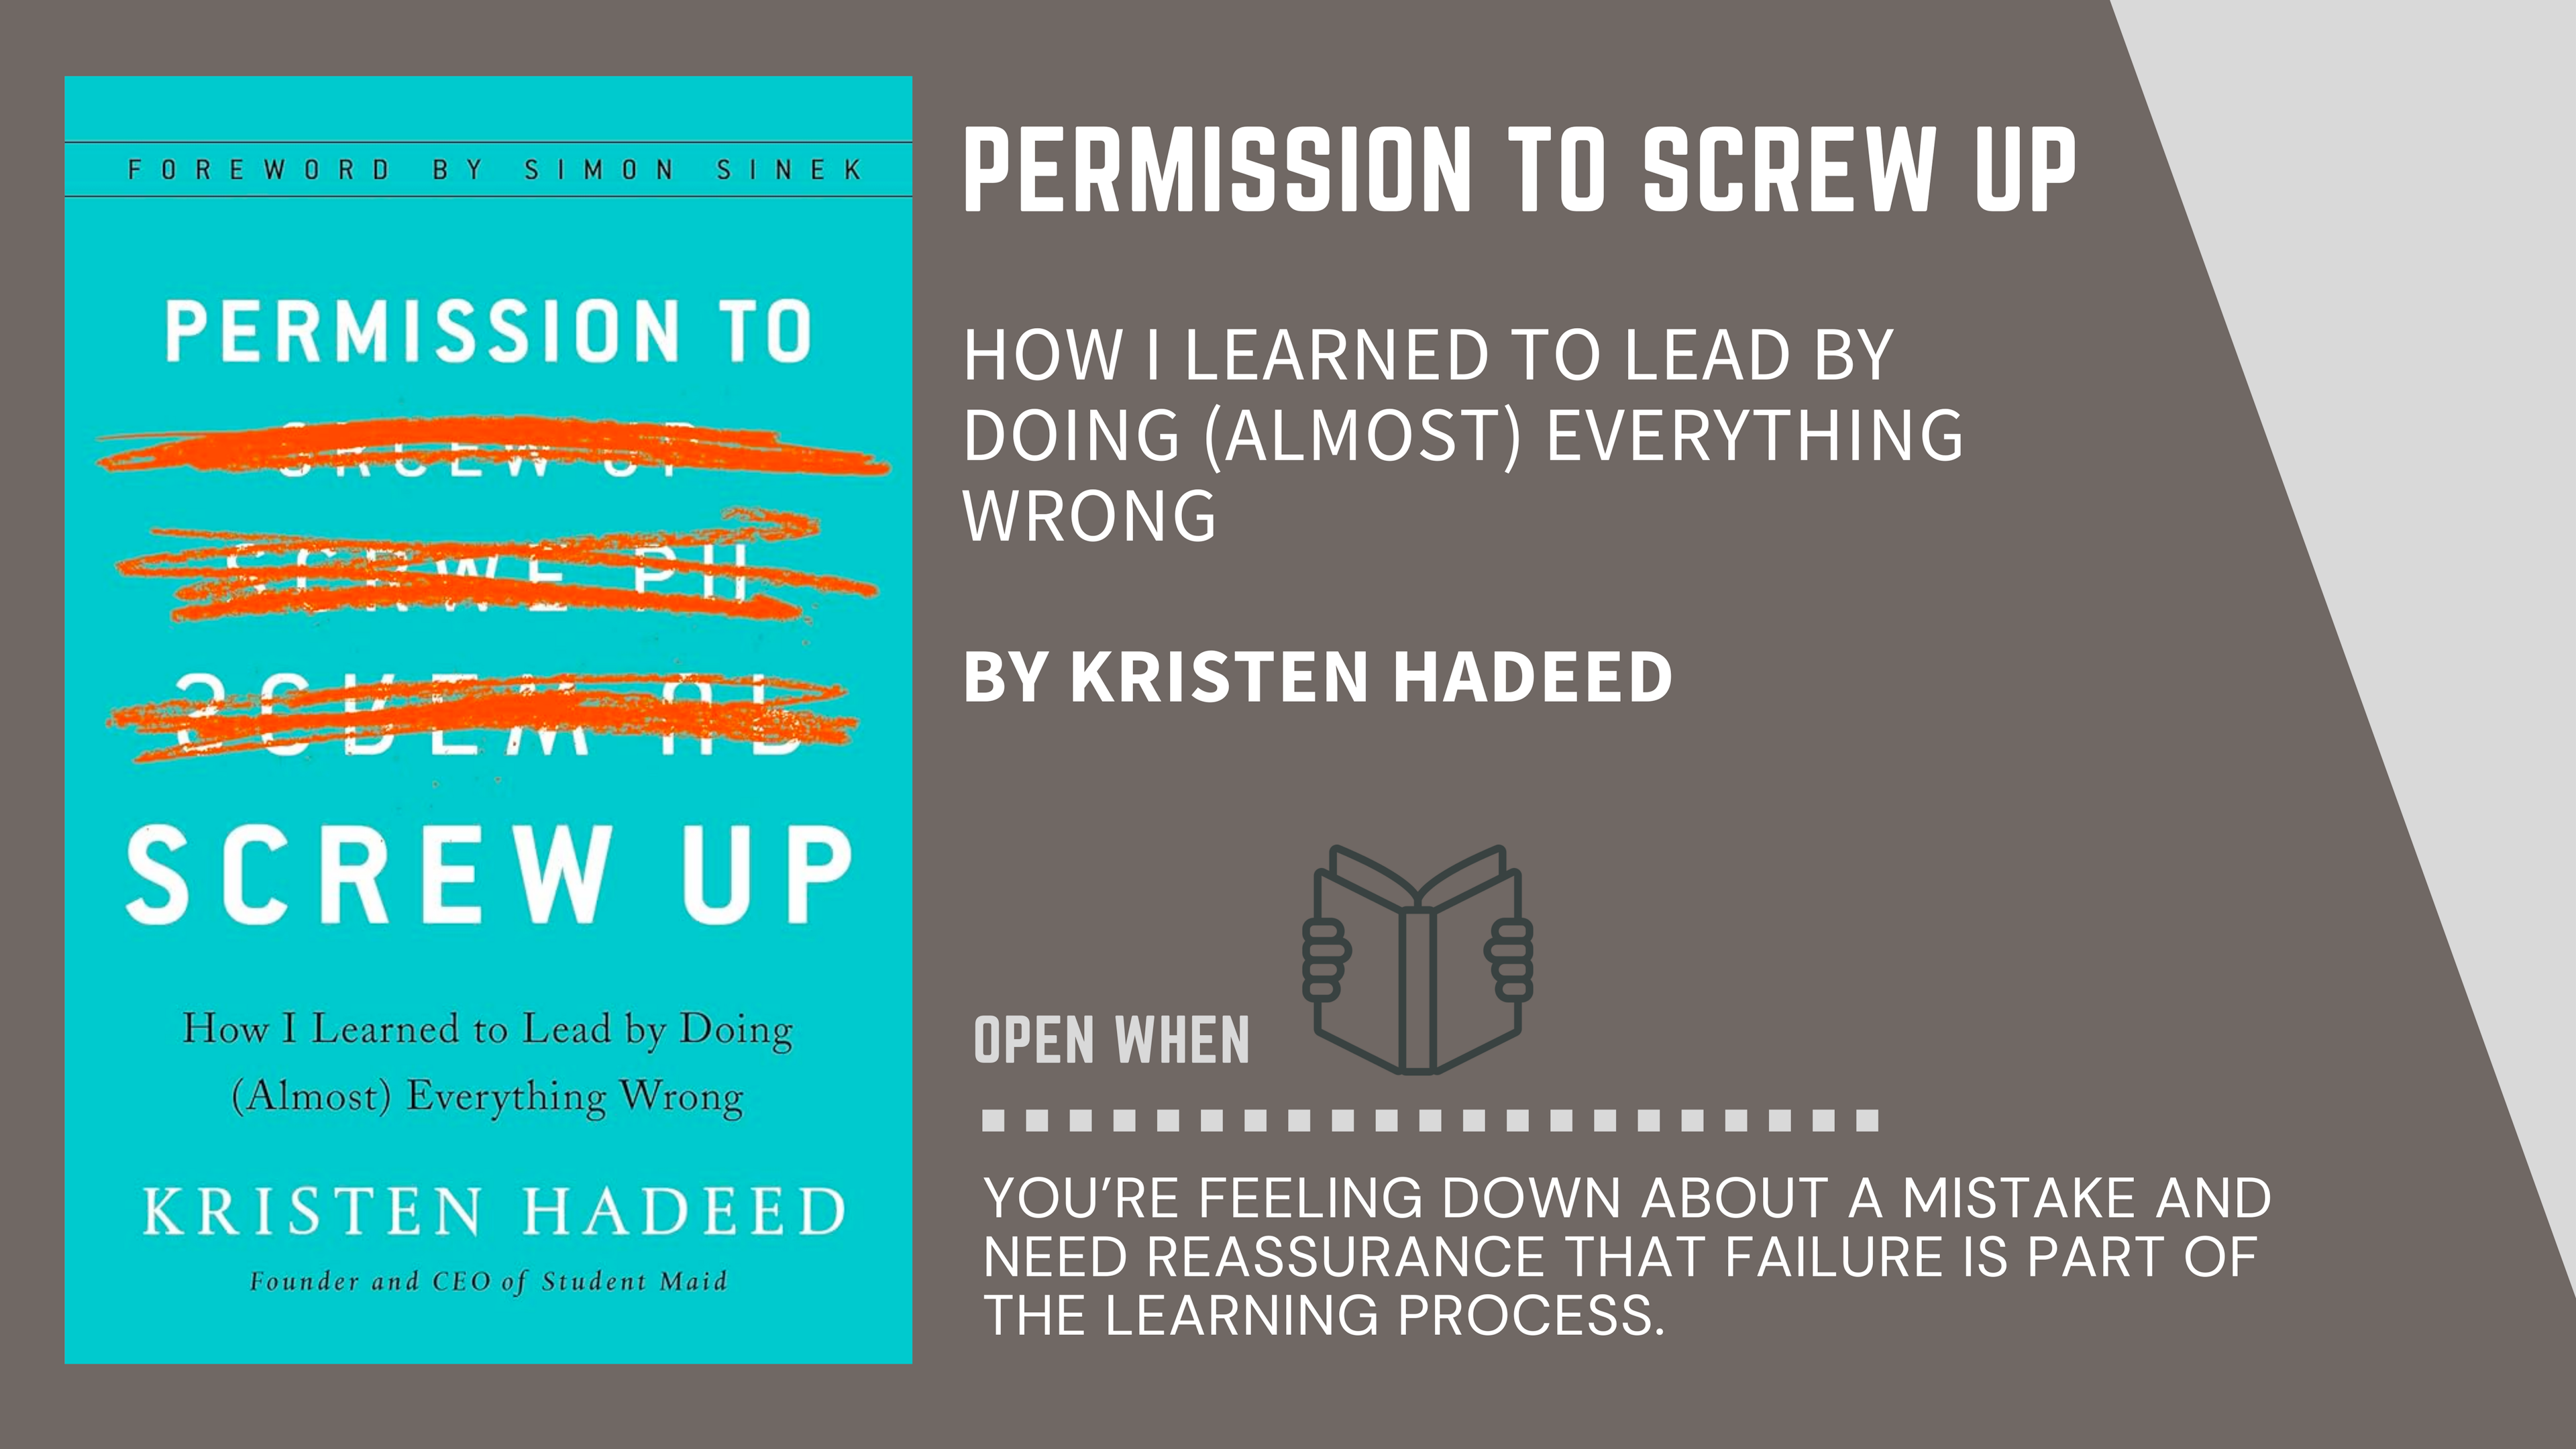 Book Cover of "Permission to Screw Up" by Kristen Hadeed